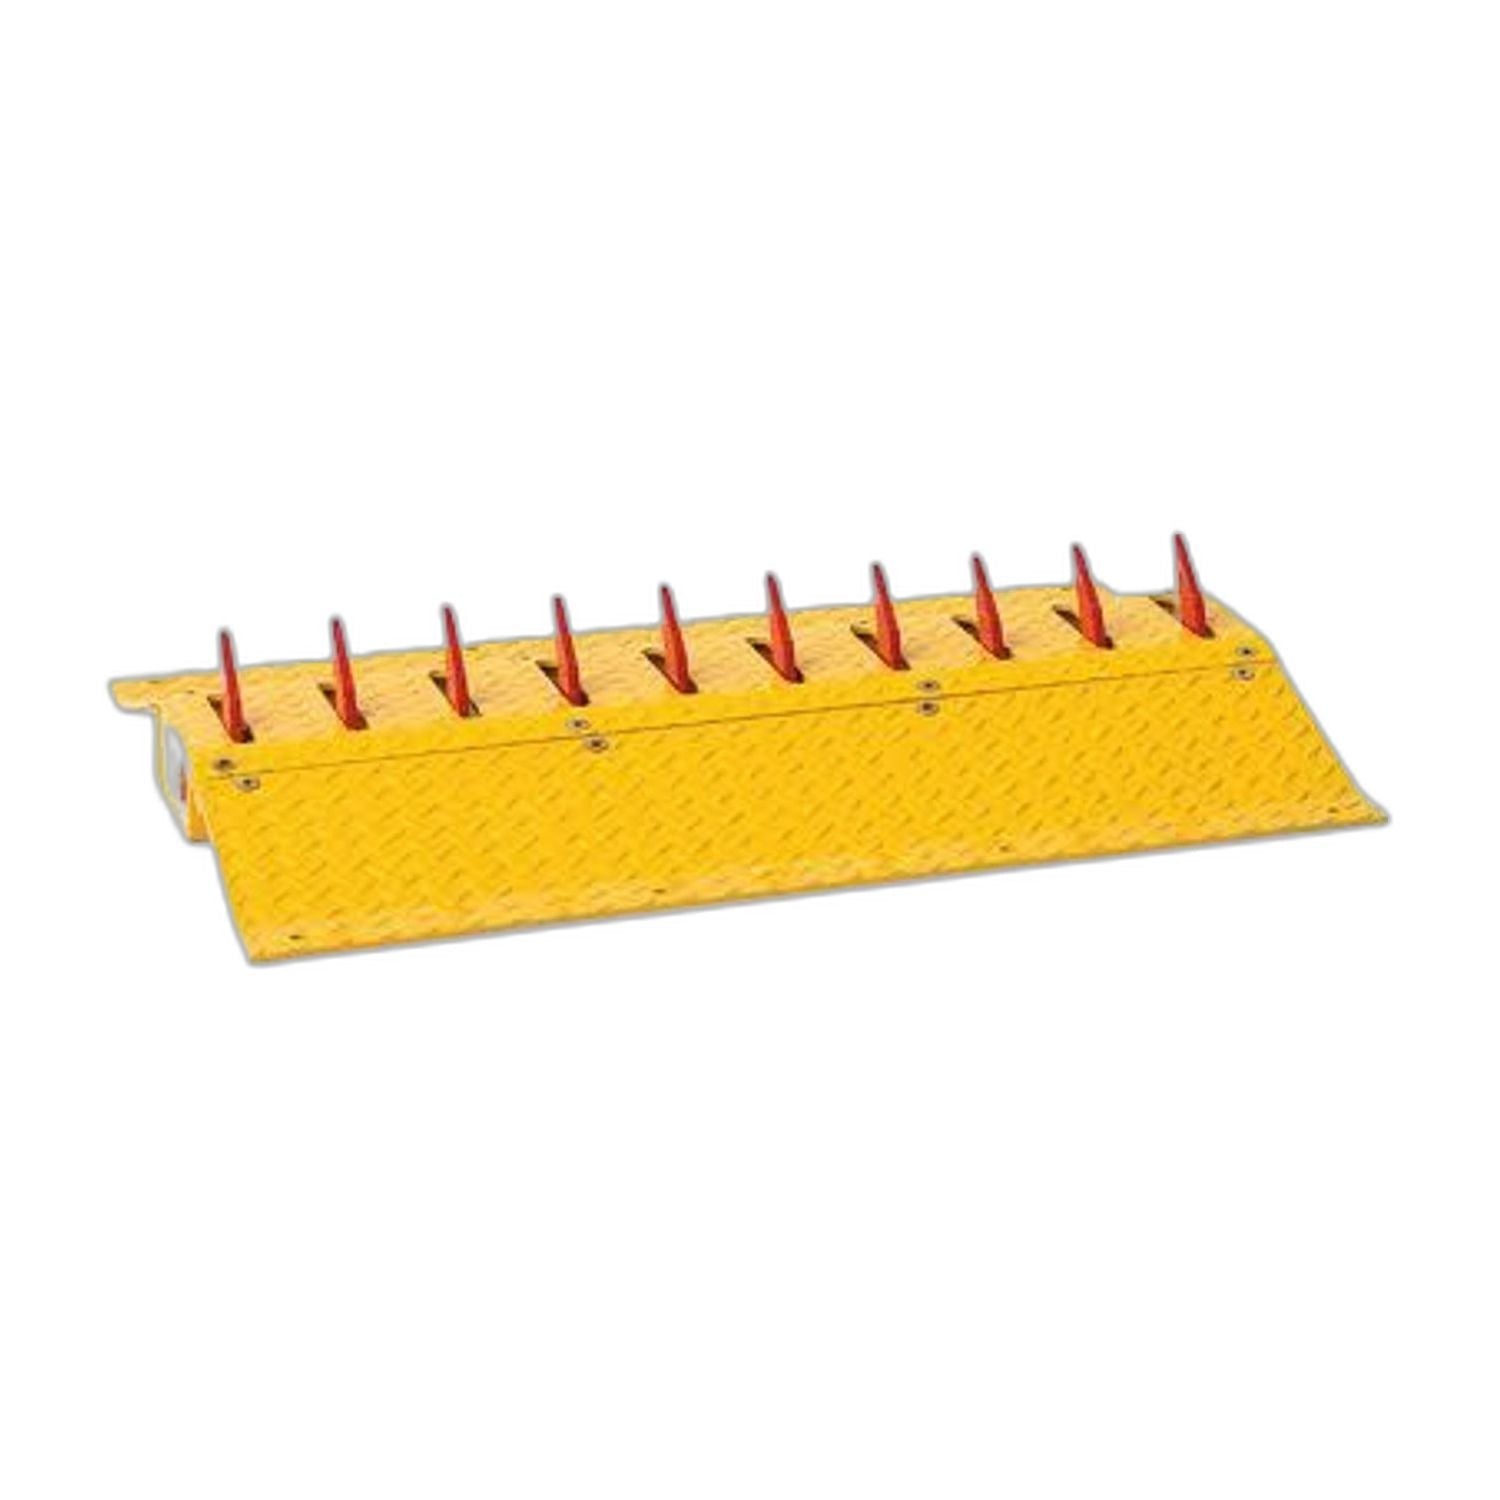 Doorking 1610-087 Above Ground Spikes (3ft Section)